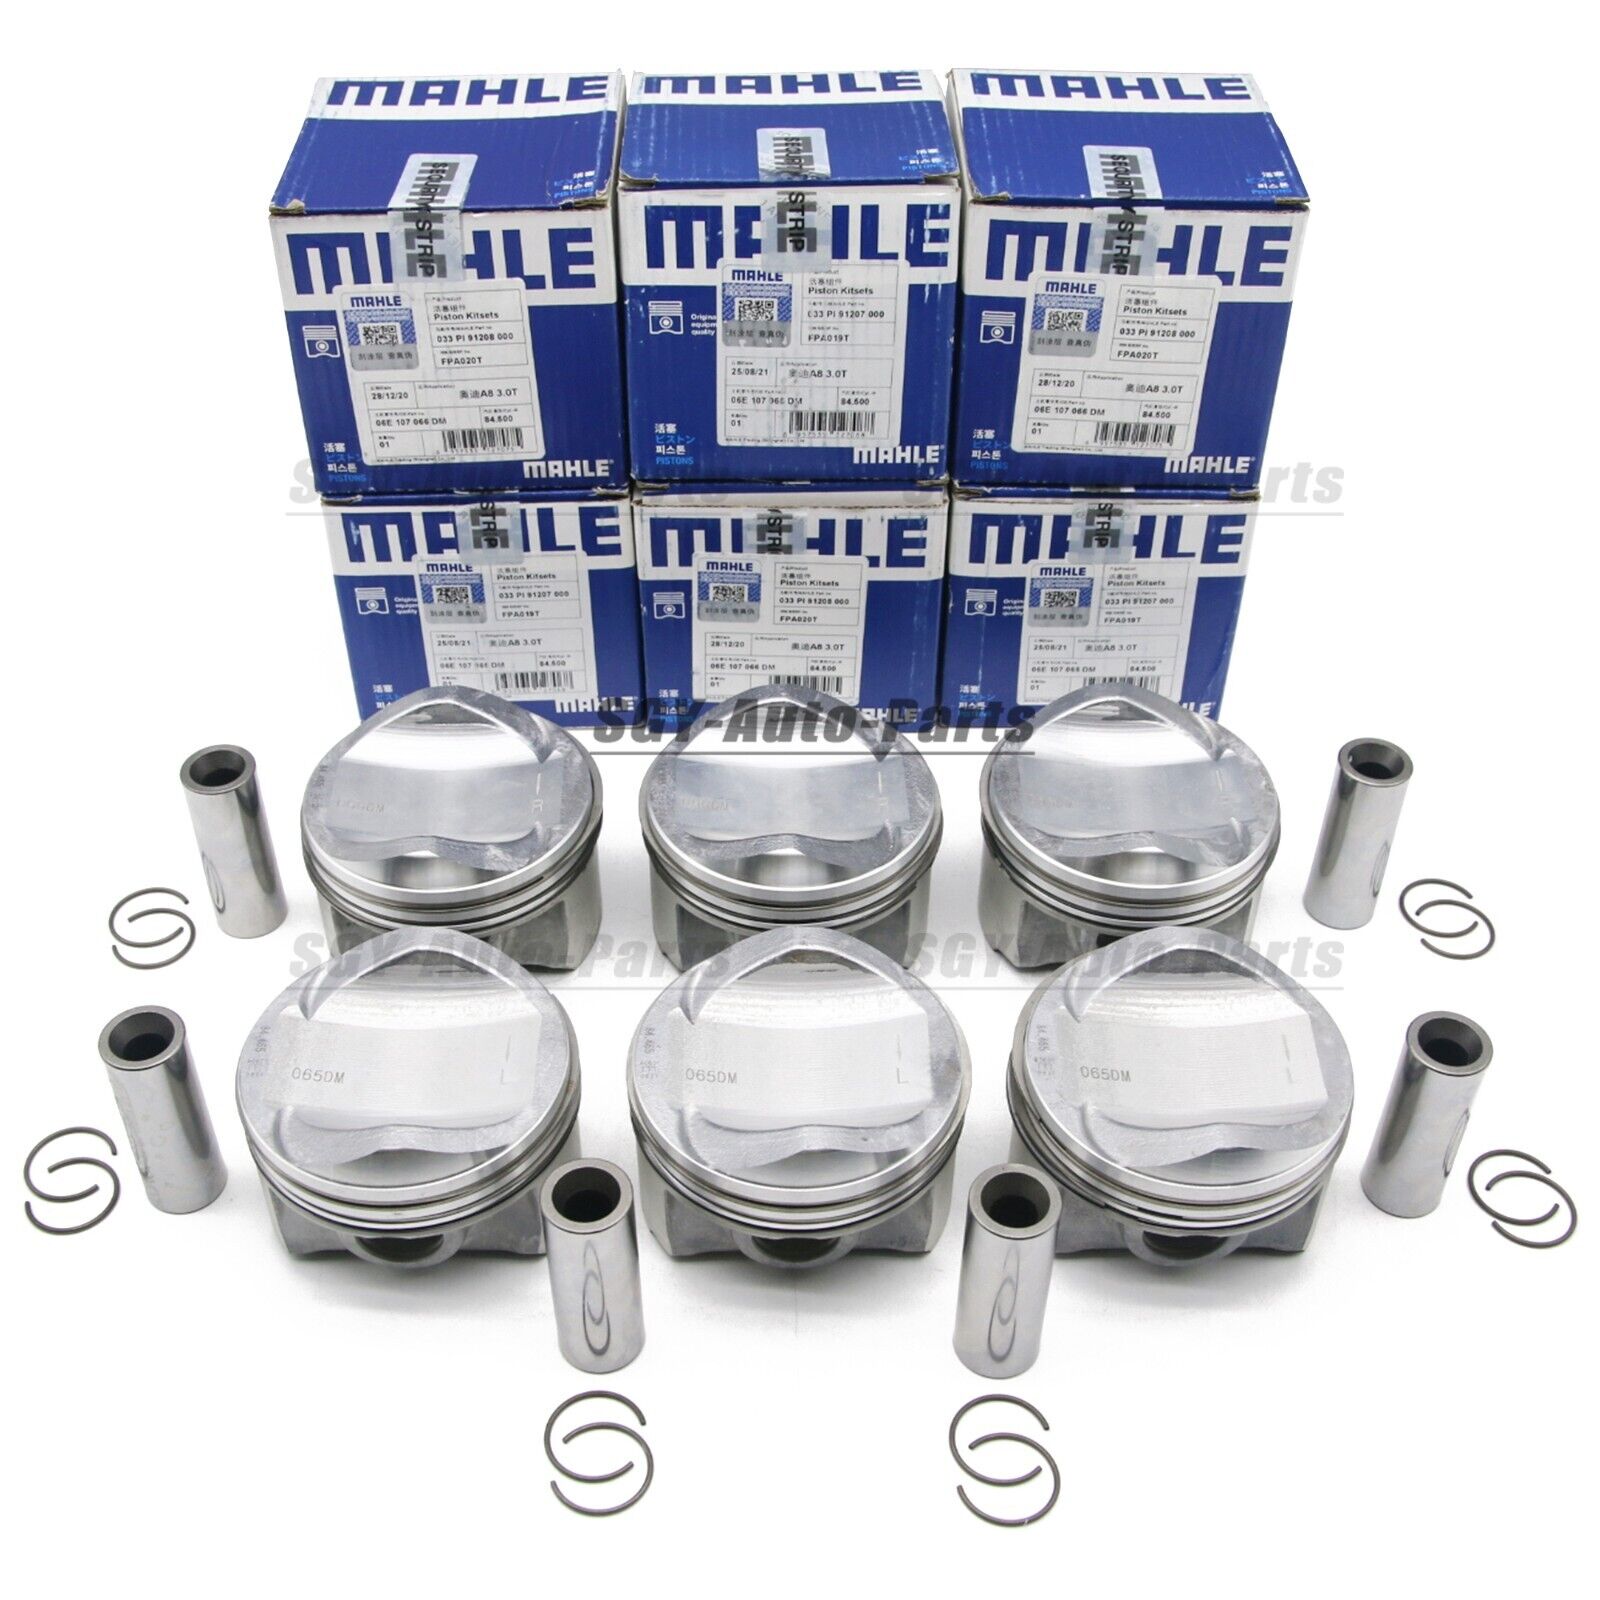 OEM MAHLE 6x Pistons & Rings Set Φ84.51mm For AUDI A4 A6 A8 Q5 Q7 S4 S5 3.0T